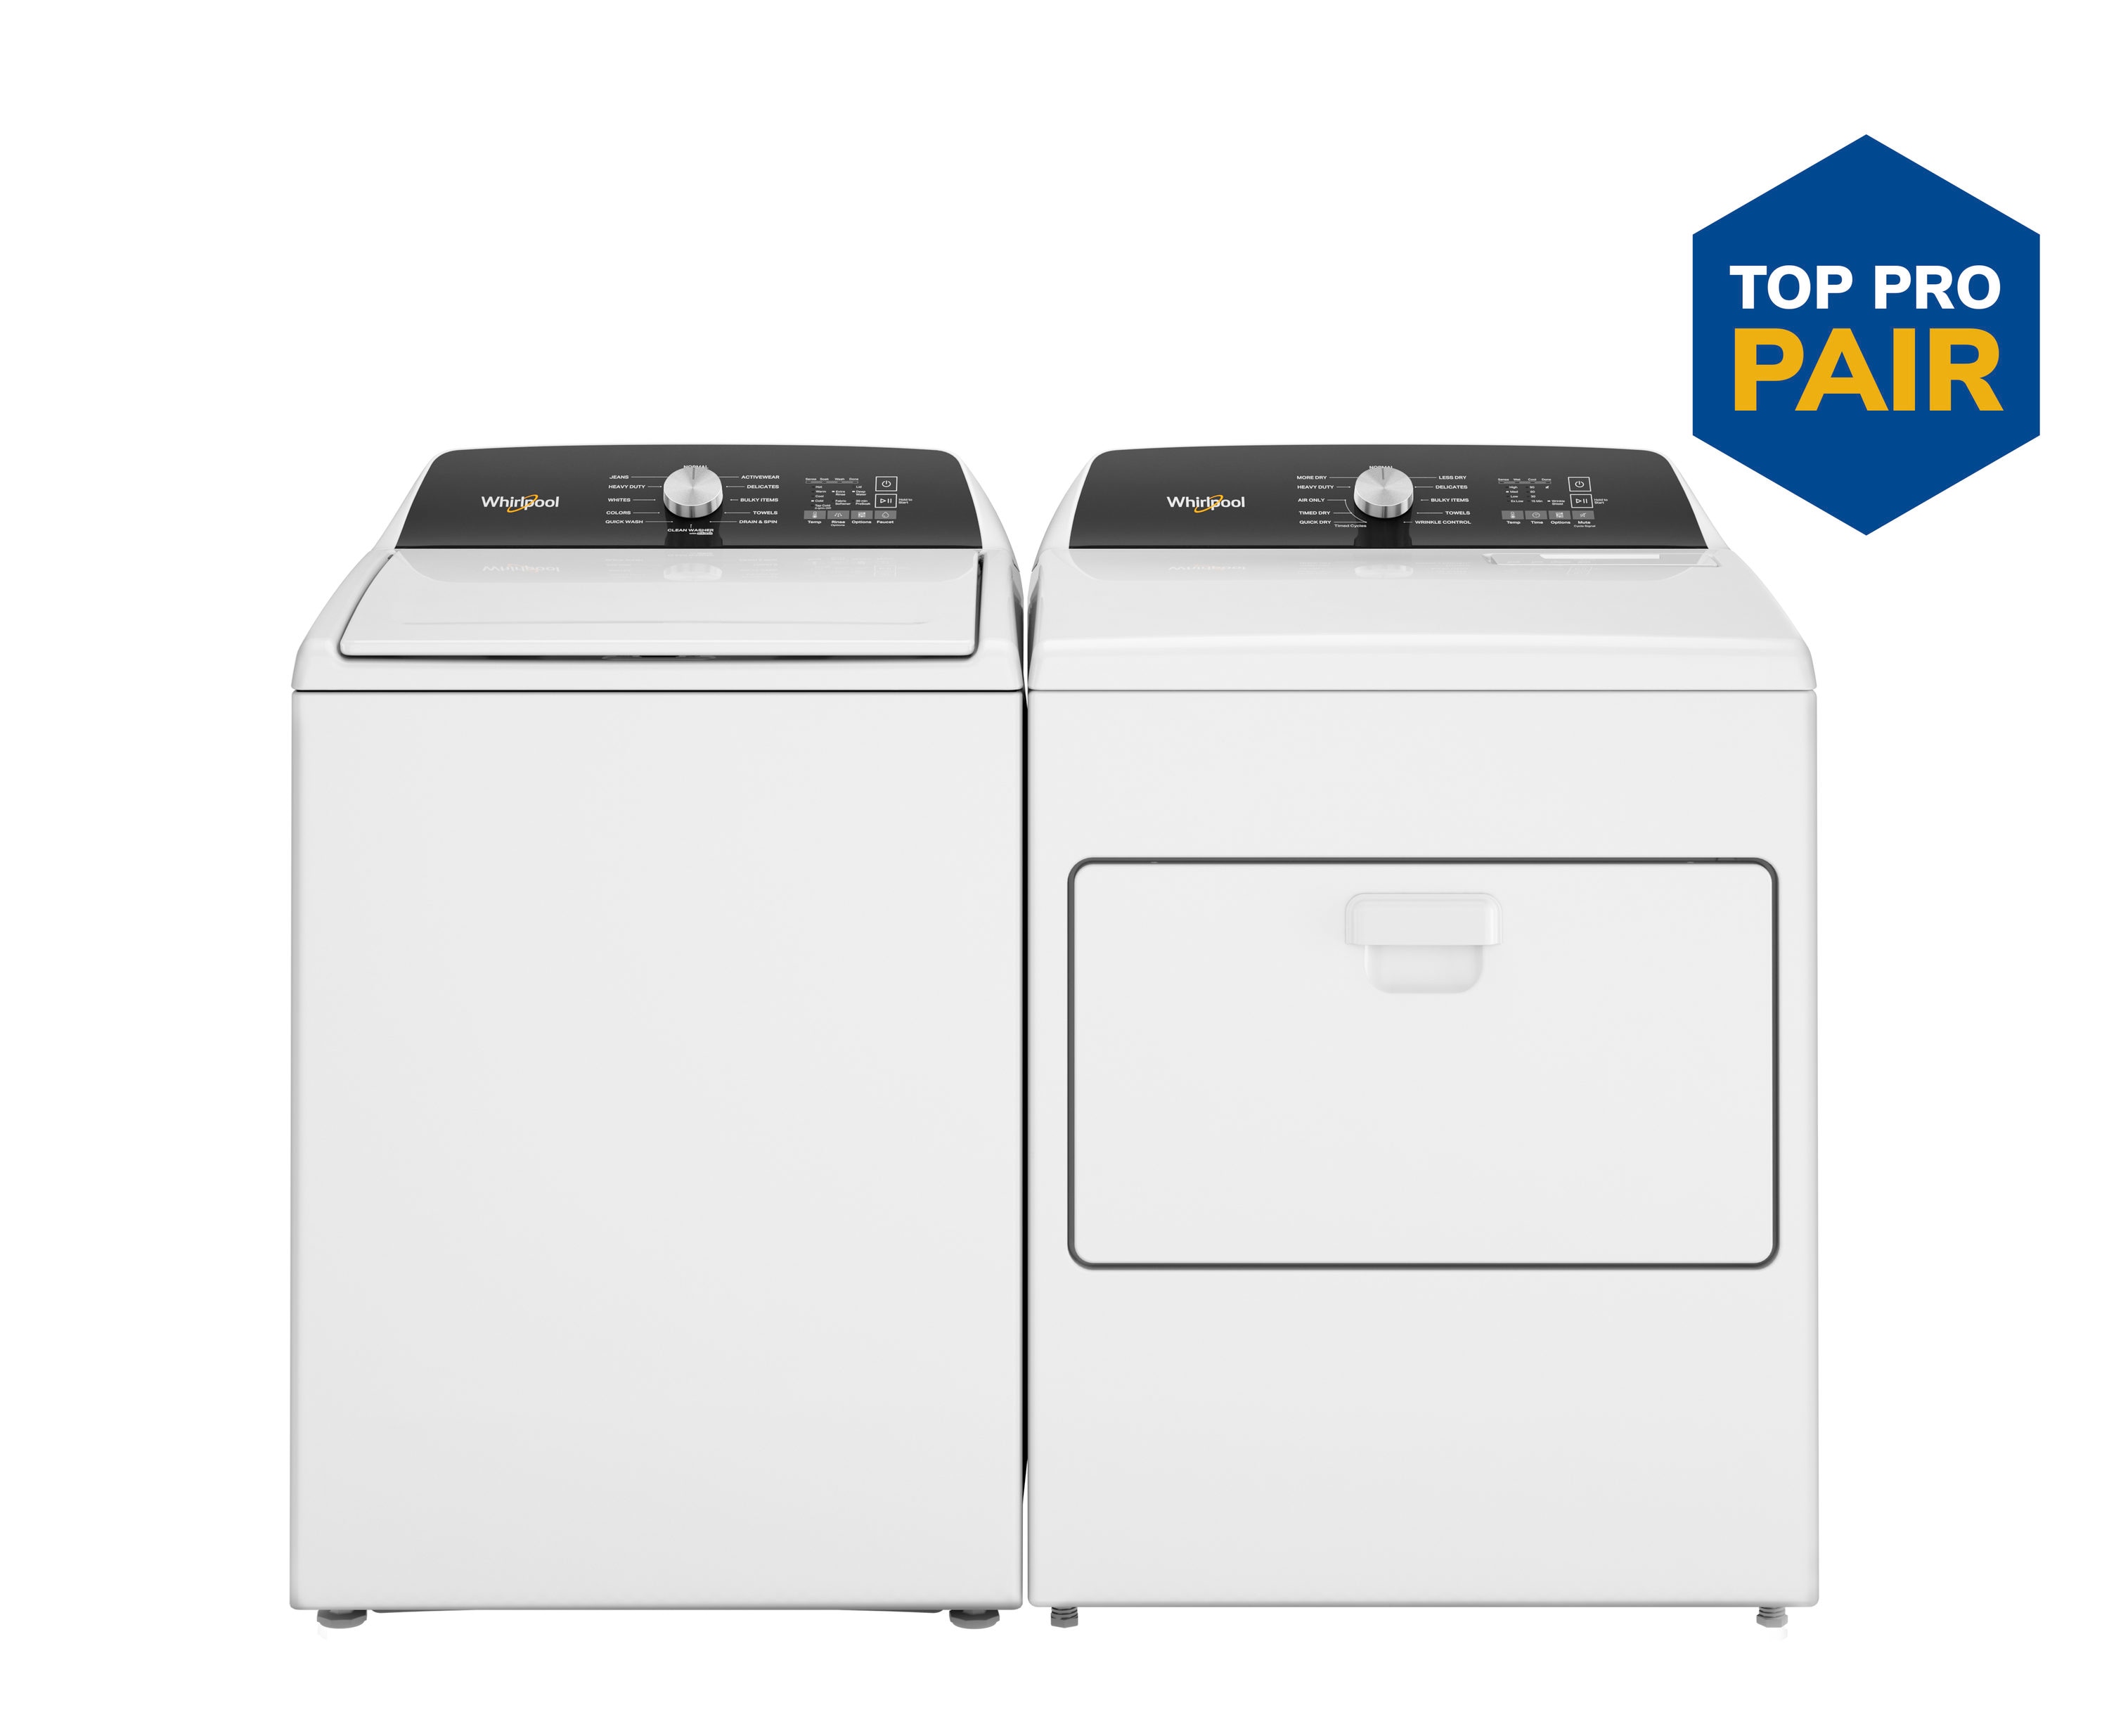 Shop Whirlpool Top Load Impellar Washer with Built-in Faucet Washer & Electric Dryer Set with Sensing at Lowes.com